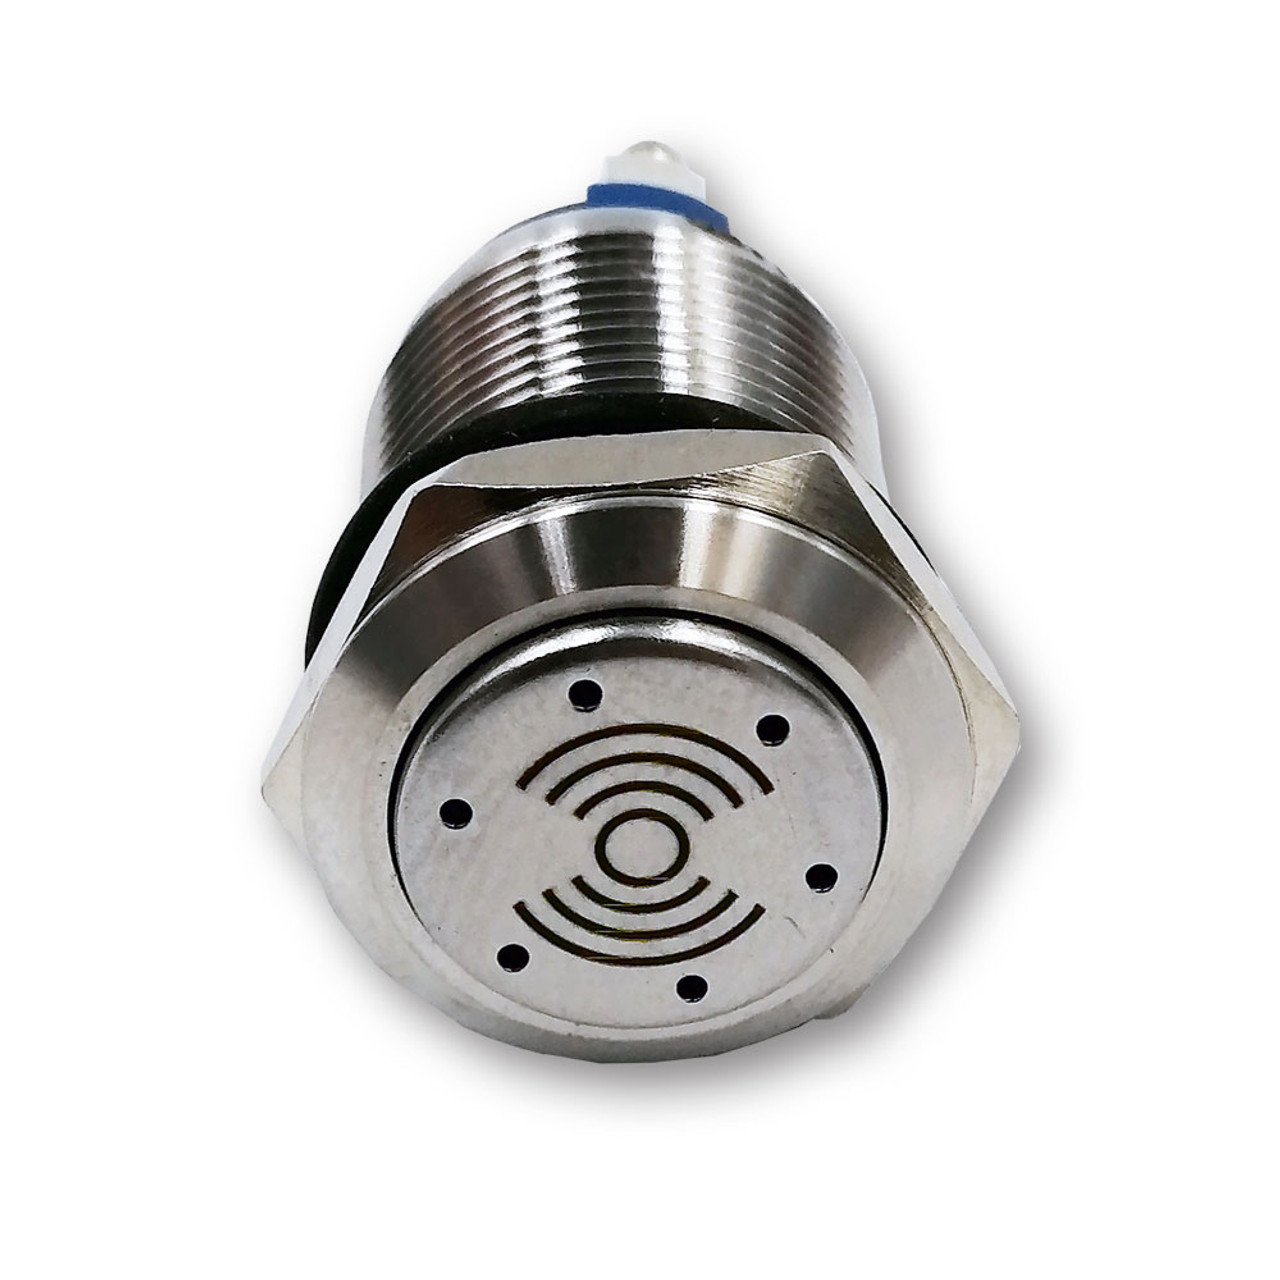 Mega LED - Electronic Buzzer With LED Indicatior - Waterproof, Stainless Steel - Apollo Lighting